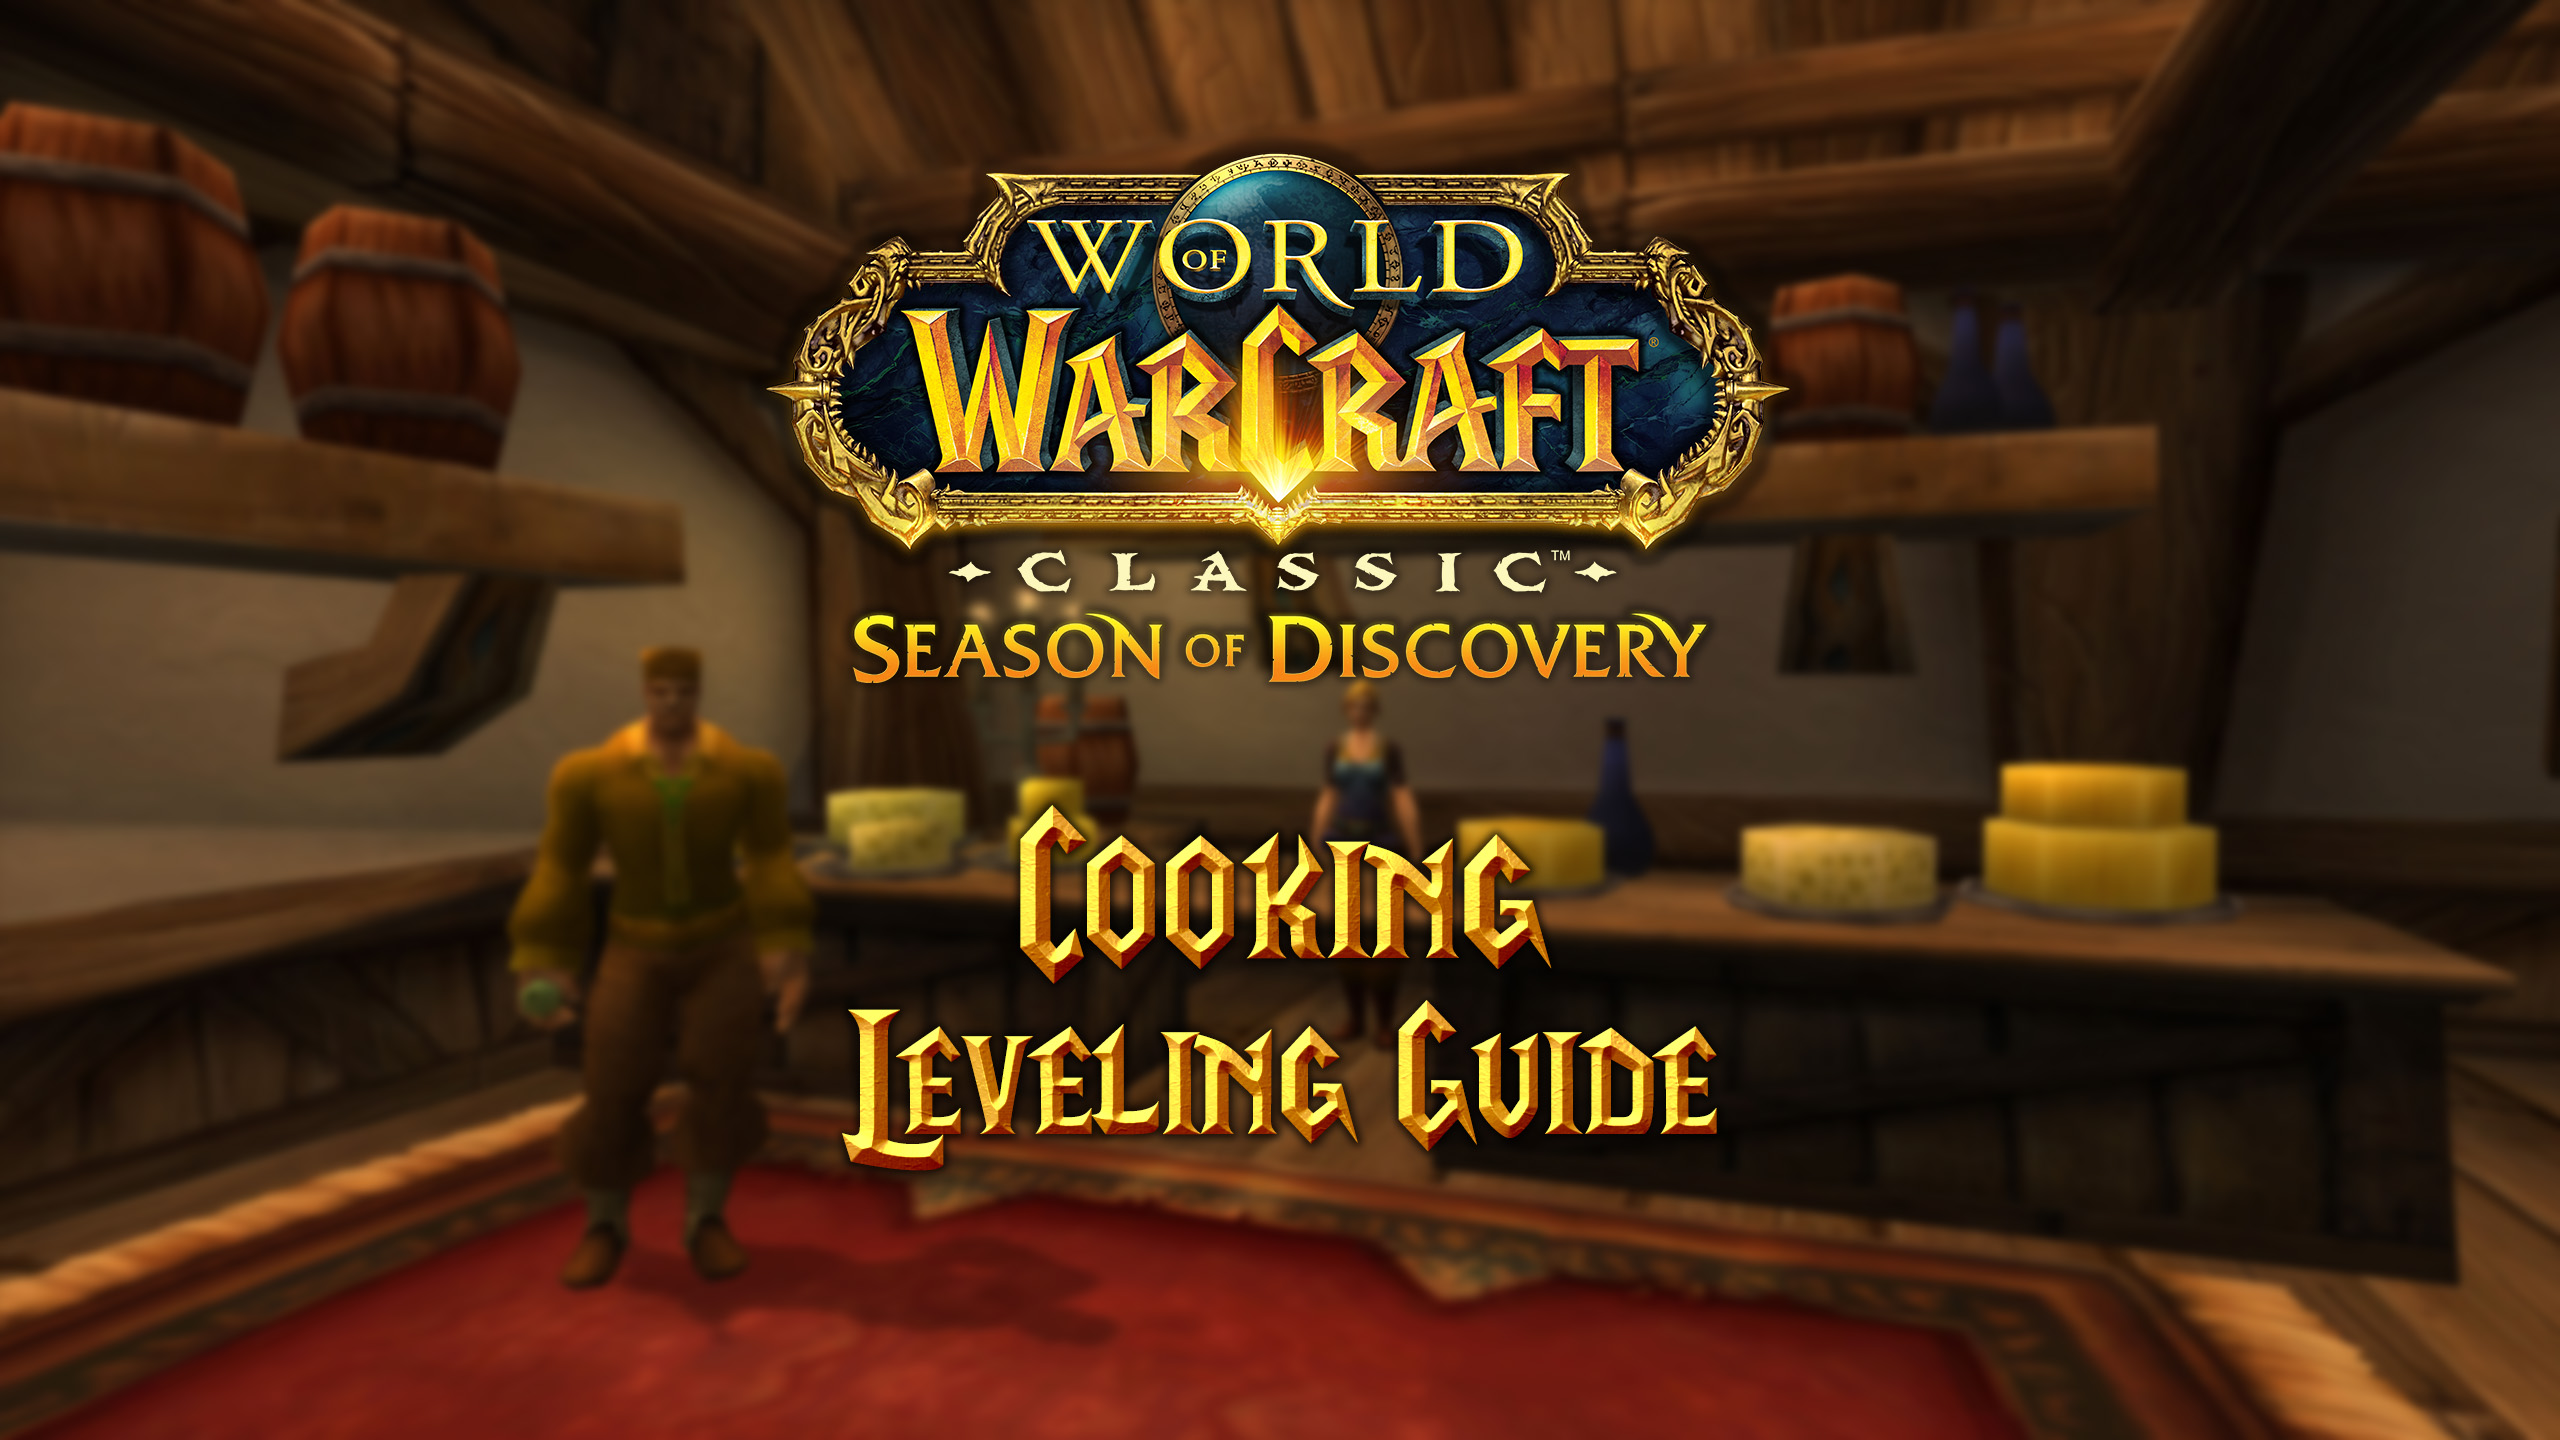 Cooking Leveling Guide for Season of Discovery